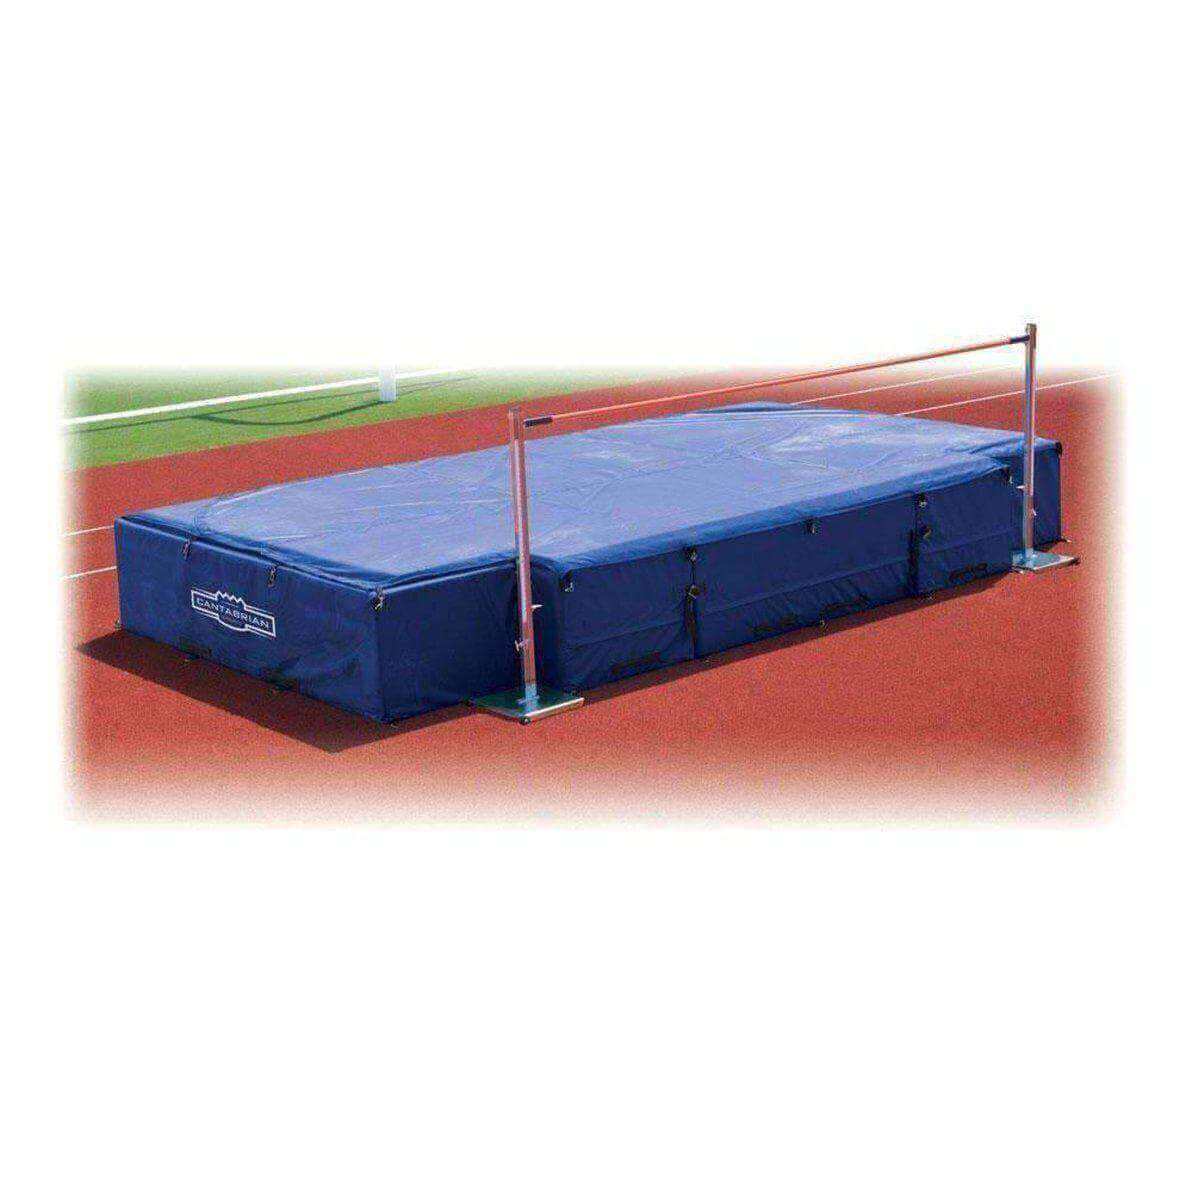 Stackhouse Cantabrian International High Jump Value Package